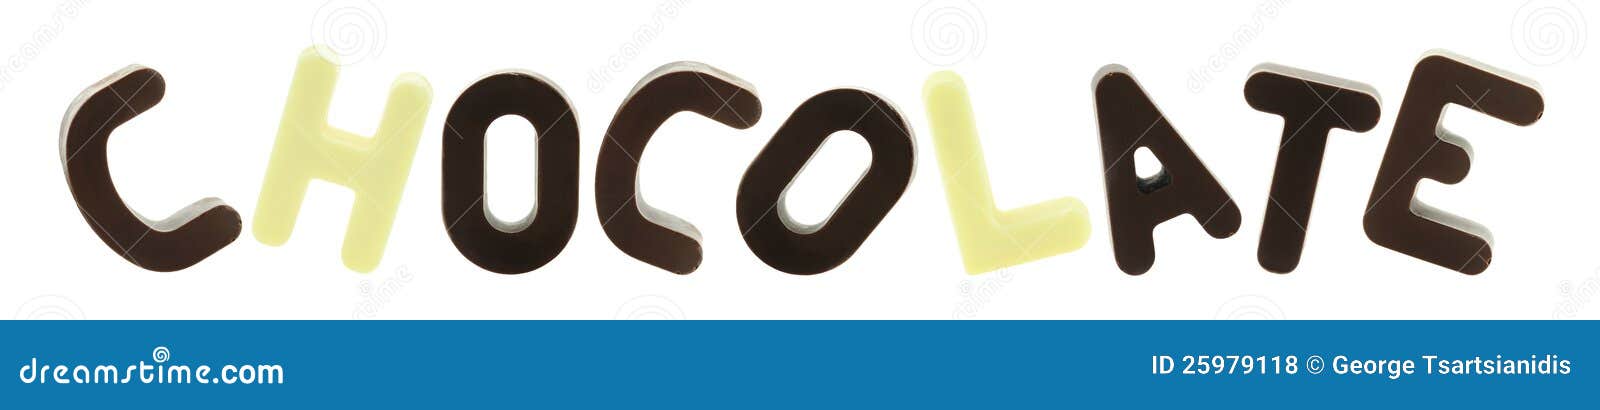 Happy chocolate letters stock photo. Image of childhood - 25979118